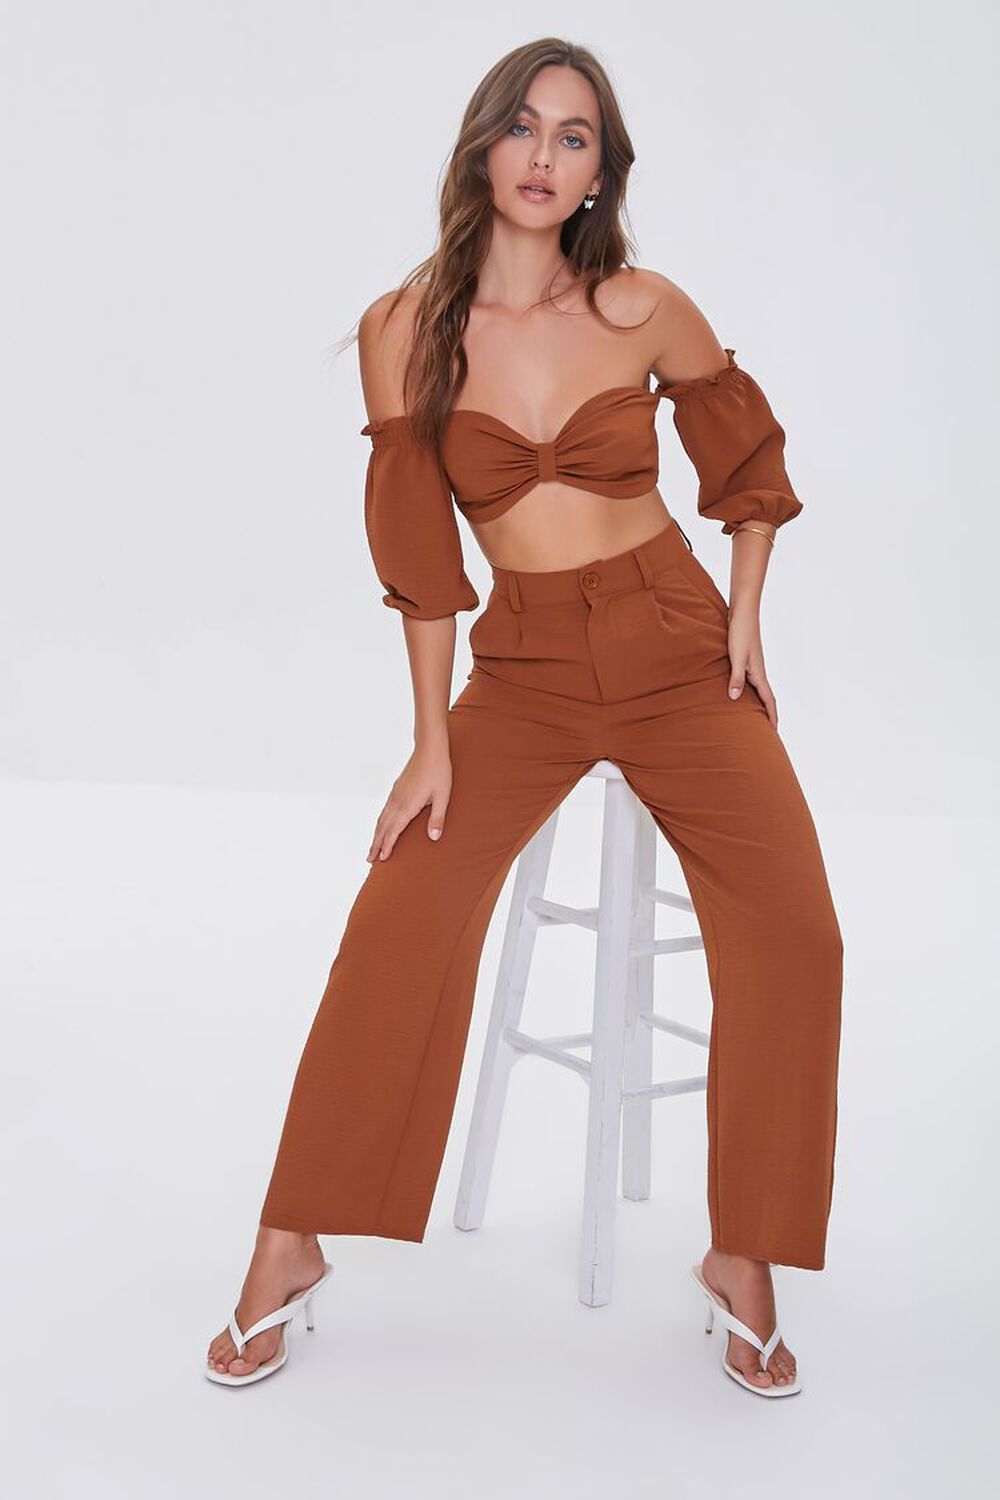 COFFEE Crop Top and High-Rise Pants Set, image 1